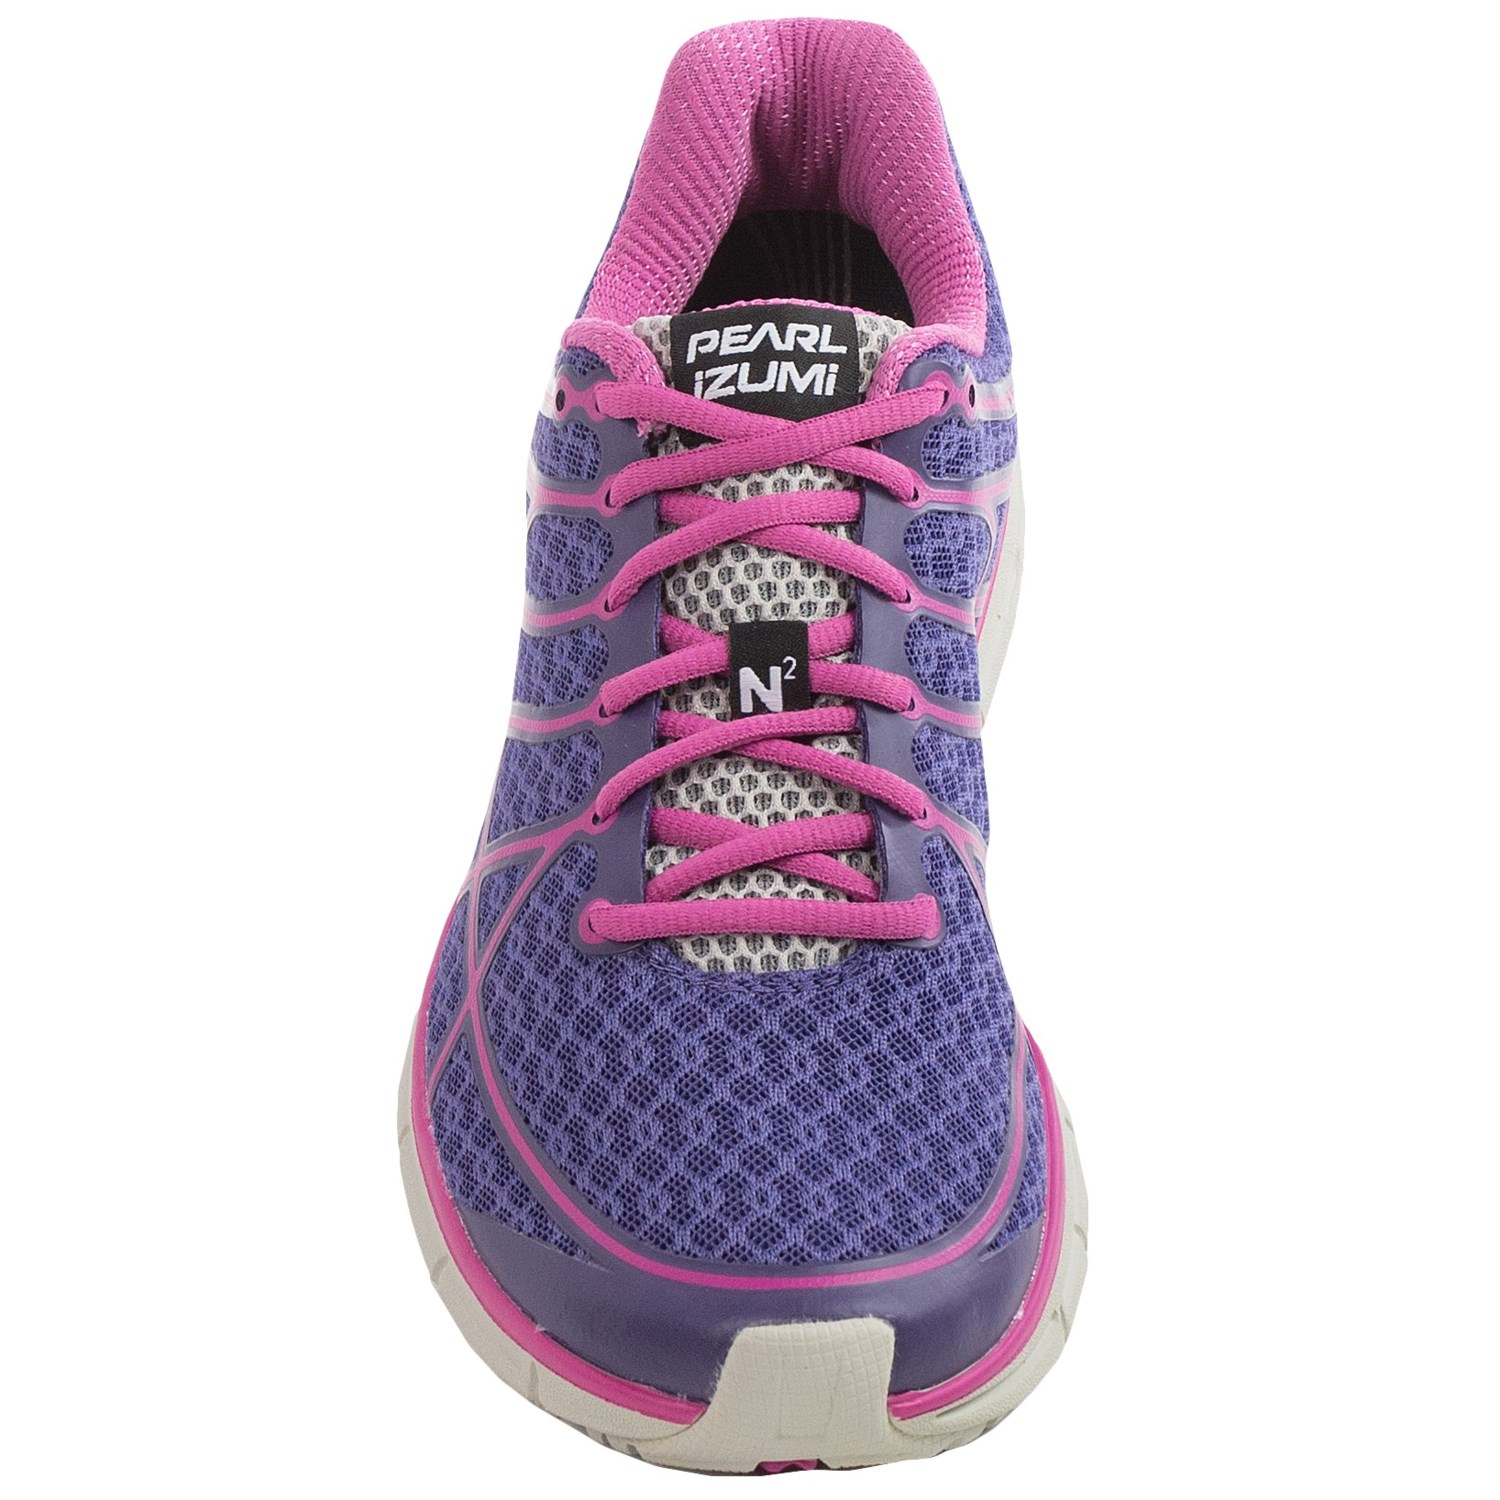 Pearl Izumi EMOTION Road N2 v2 Running Shoes (For Women) Save 70